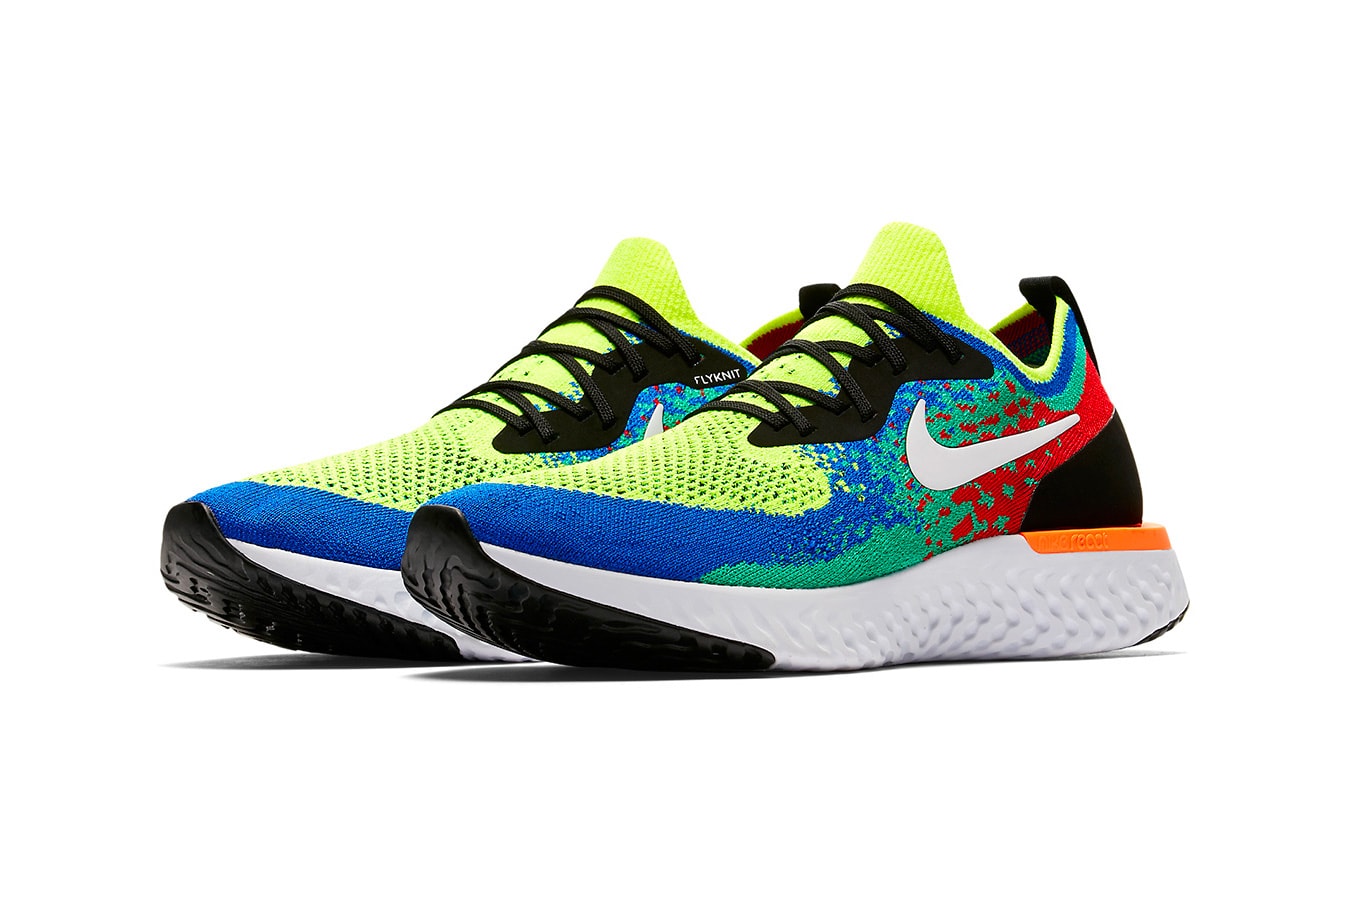 Nike Epic React Flyknit "Belgium" Official images release date look price colorway sneaker